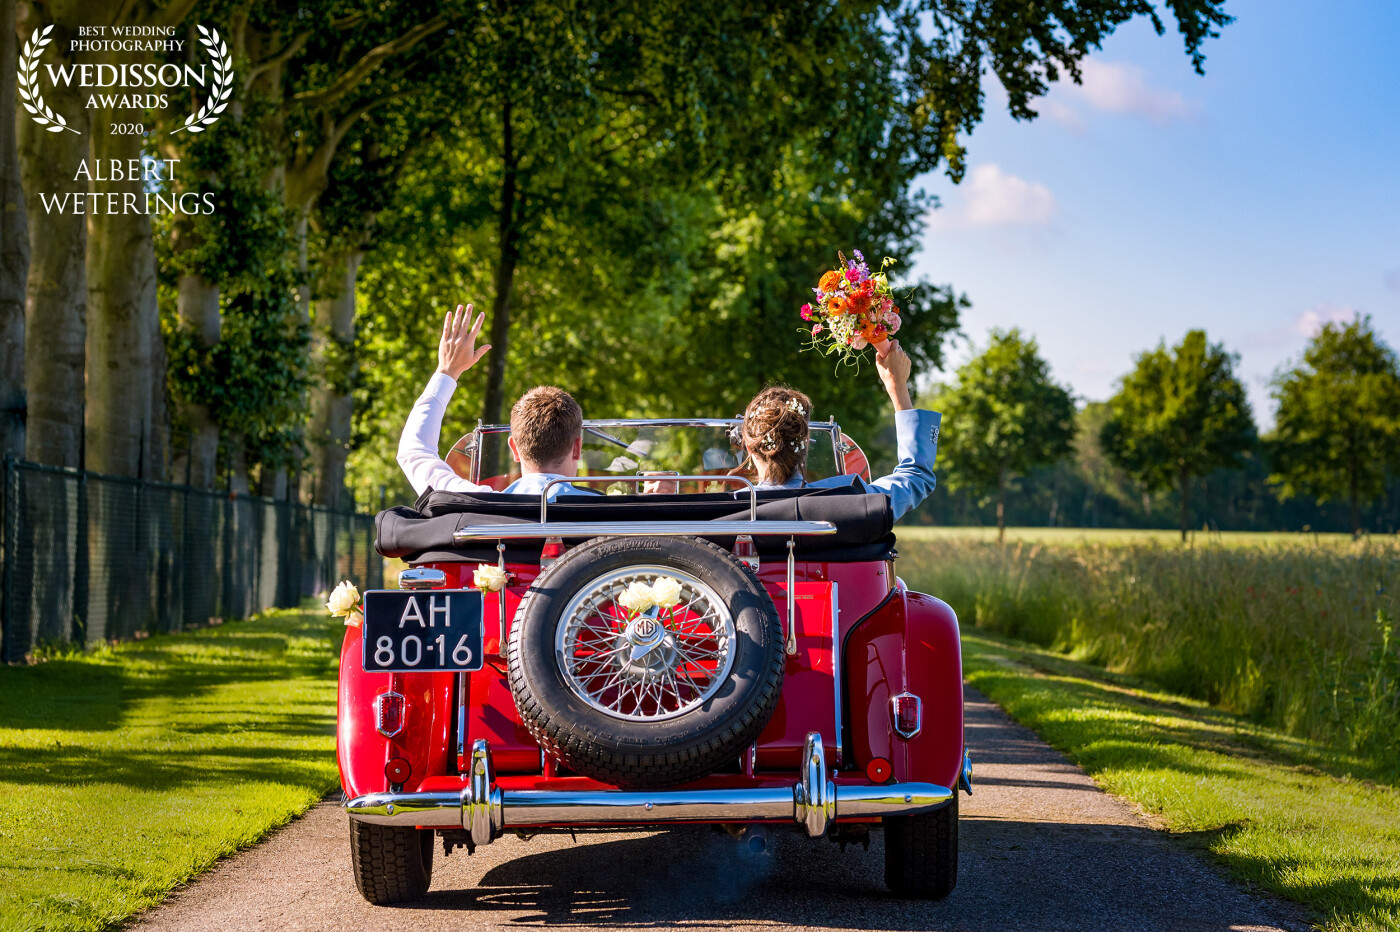 A beautifull day, lots of love and happiness, a great and handsome couple and an old MG sportscar. All we needed for this beautifull picture!